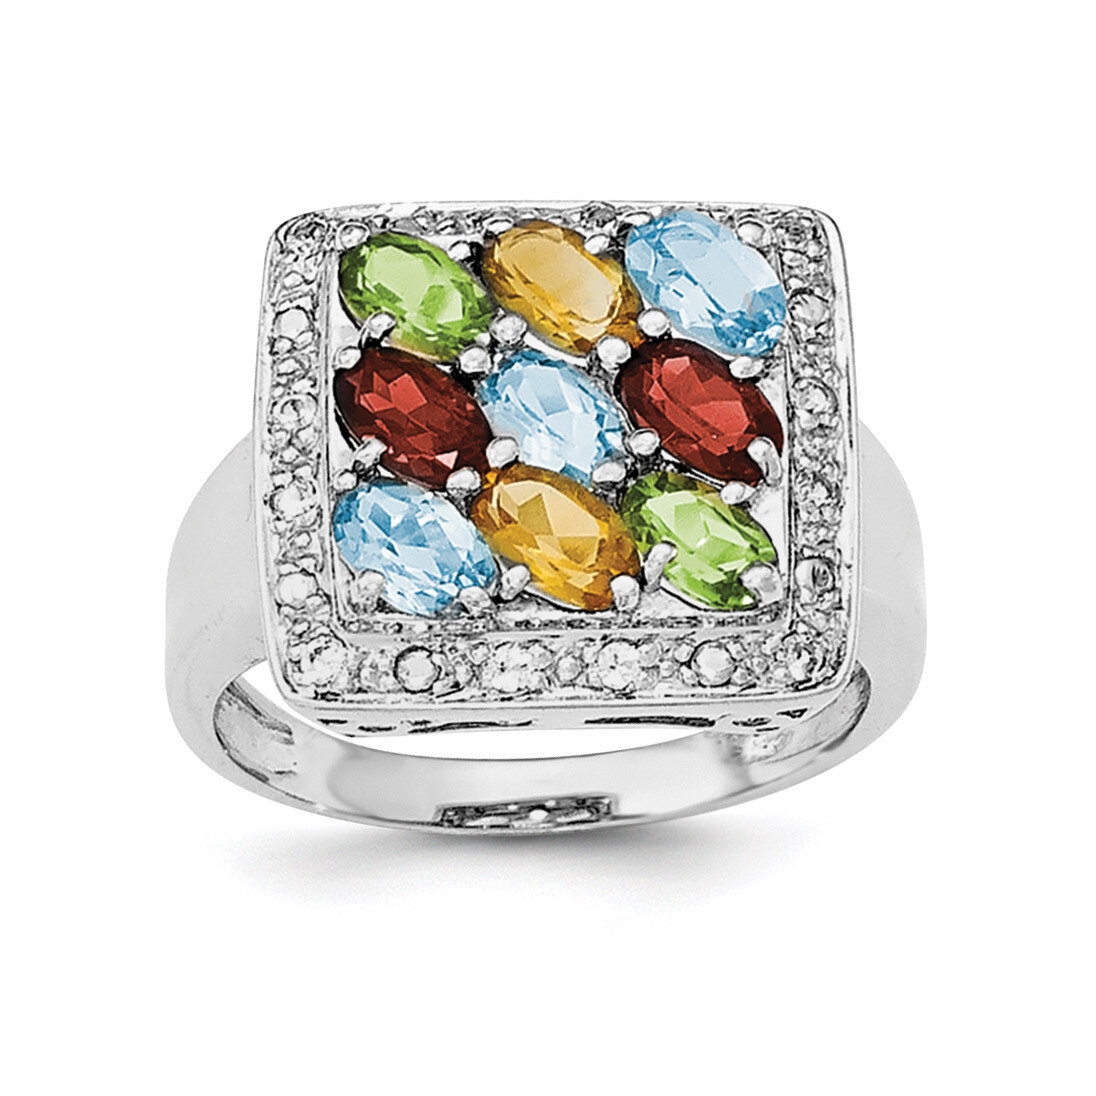 Multicolored CZ Diamond Ring Sterling Silver Polished QR6303